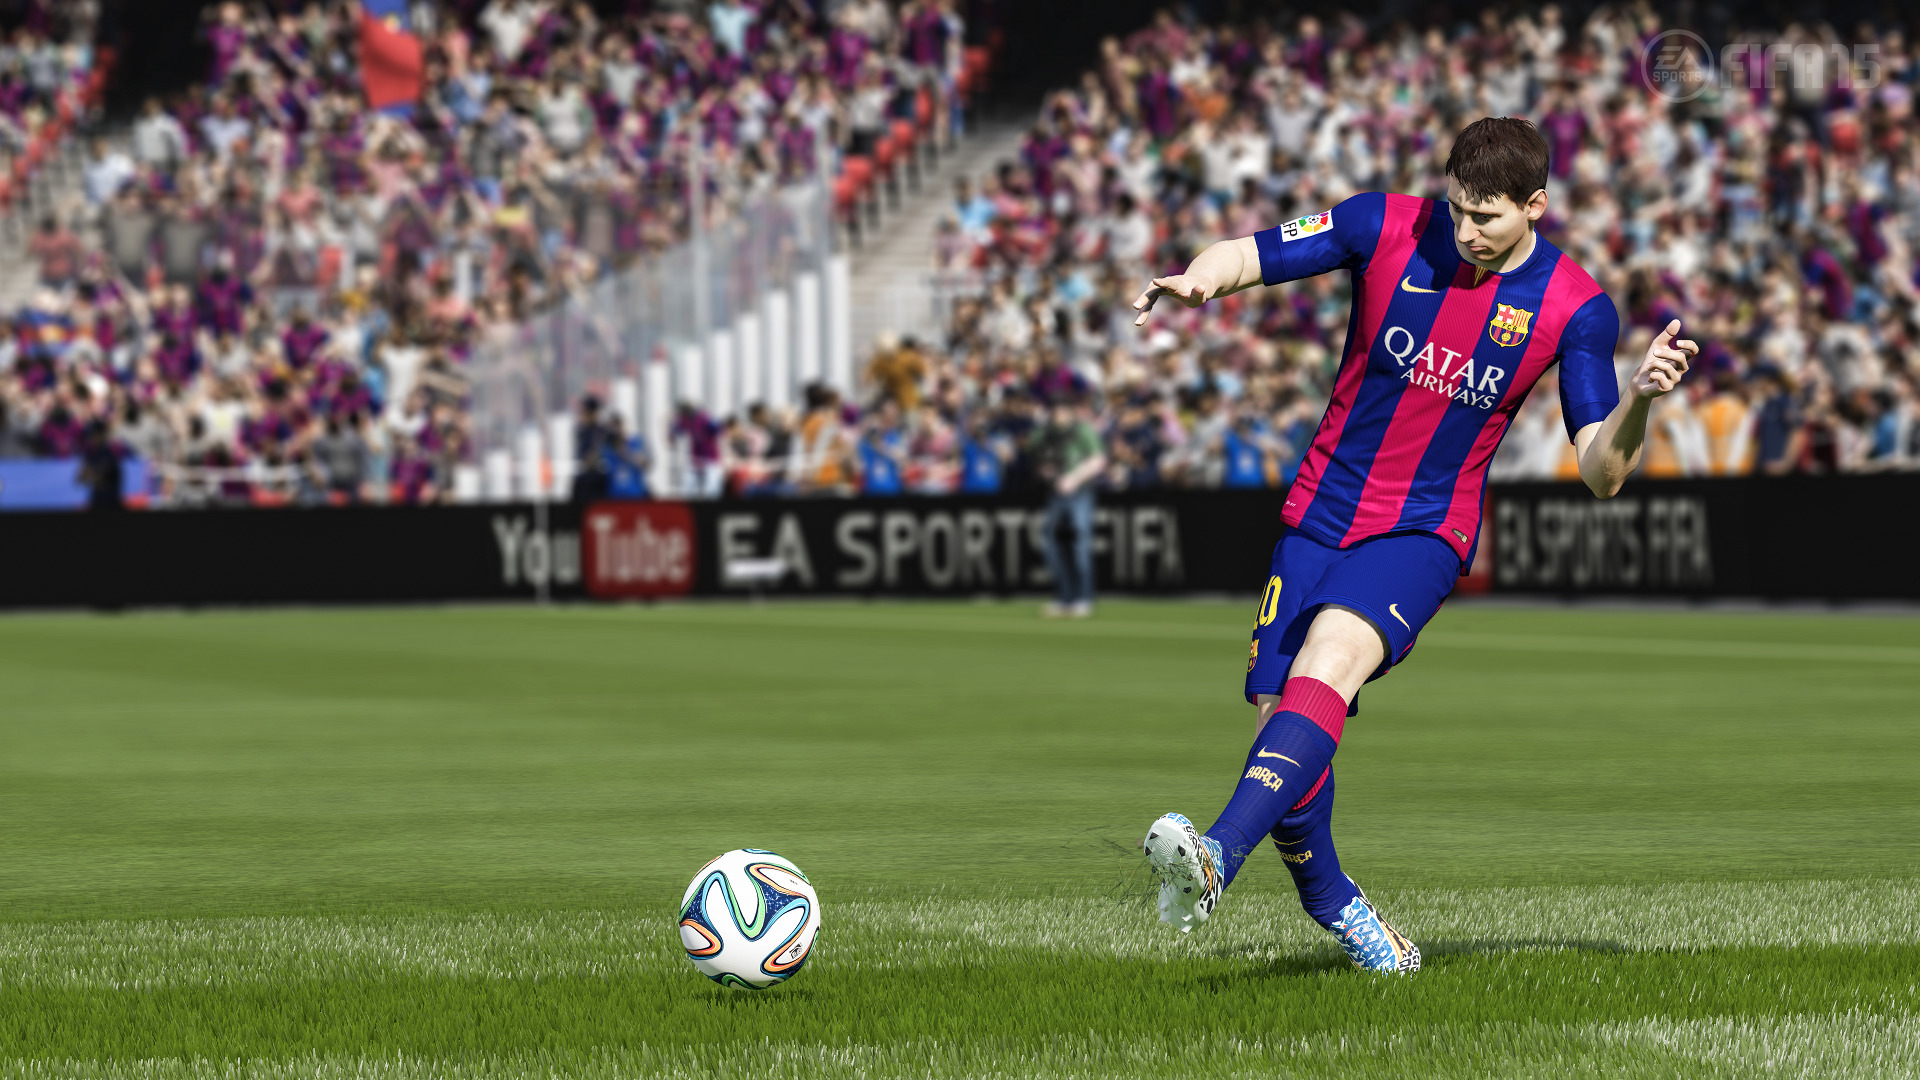 No, You Can’t Bite People In FIFA 15